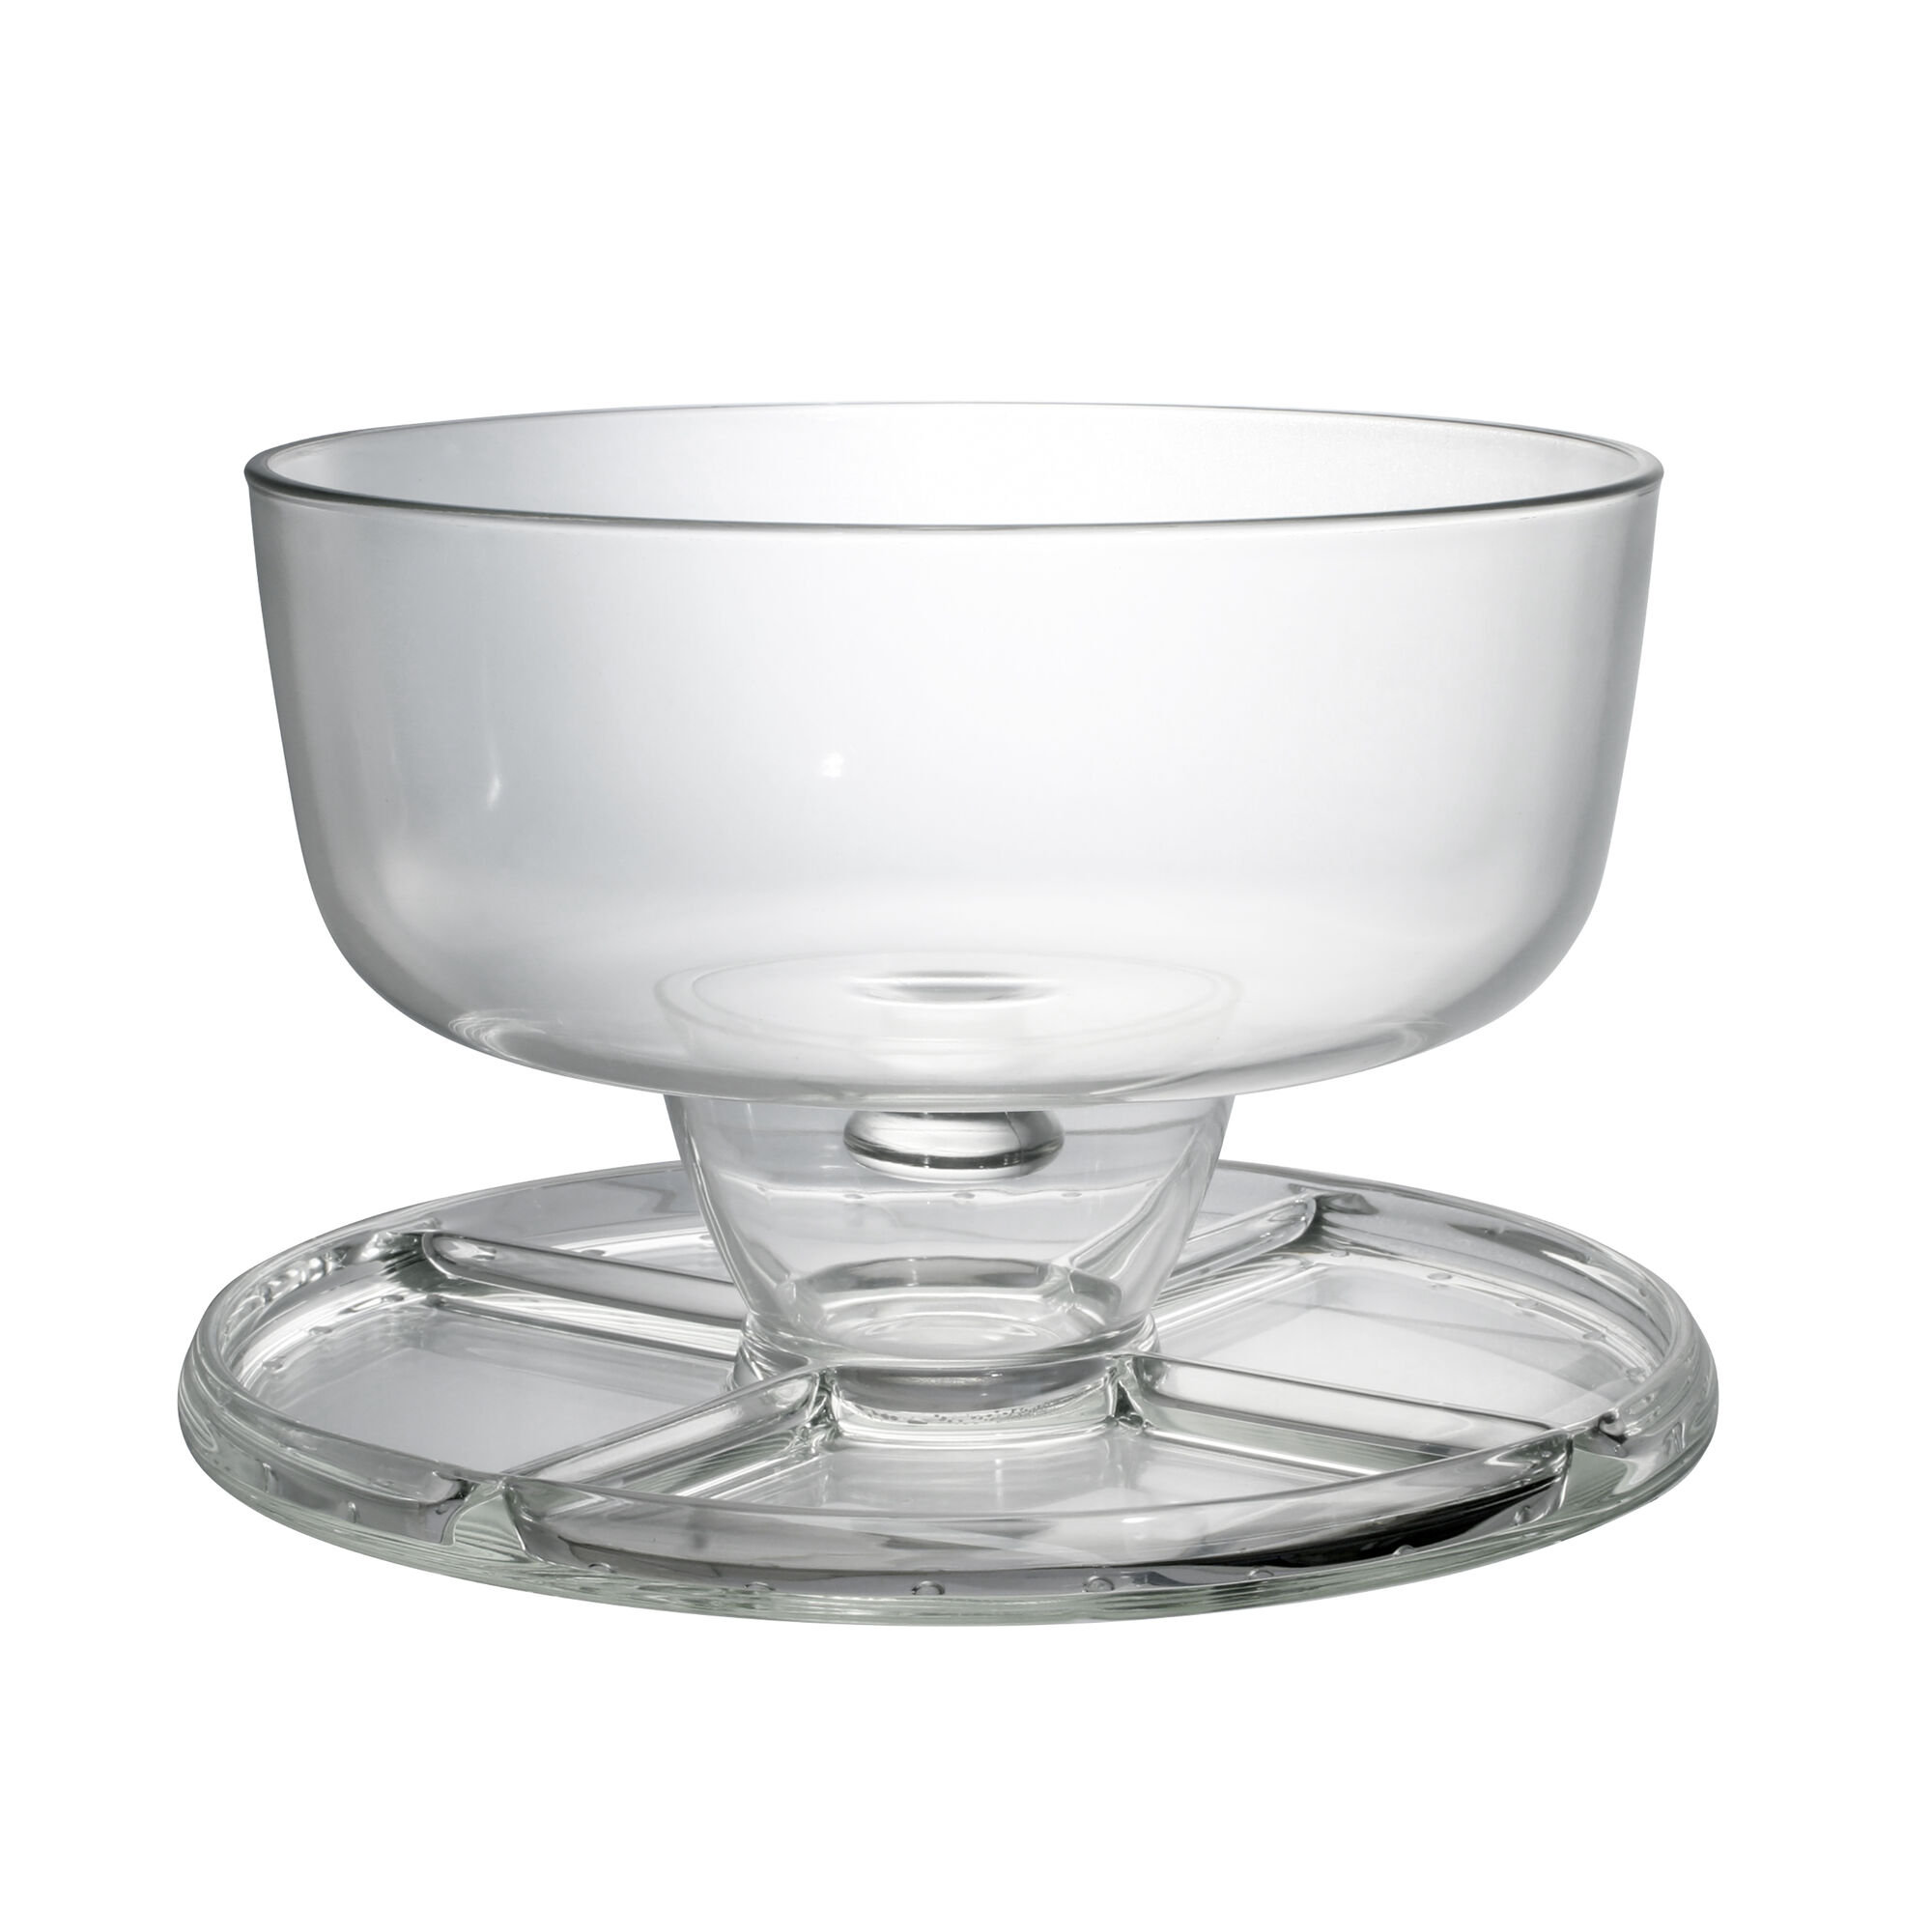 Better Homes & Gardens 12.25 in Round Acrylic Everyday Cake Stand, Clear